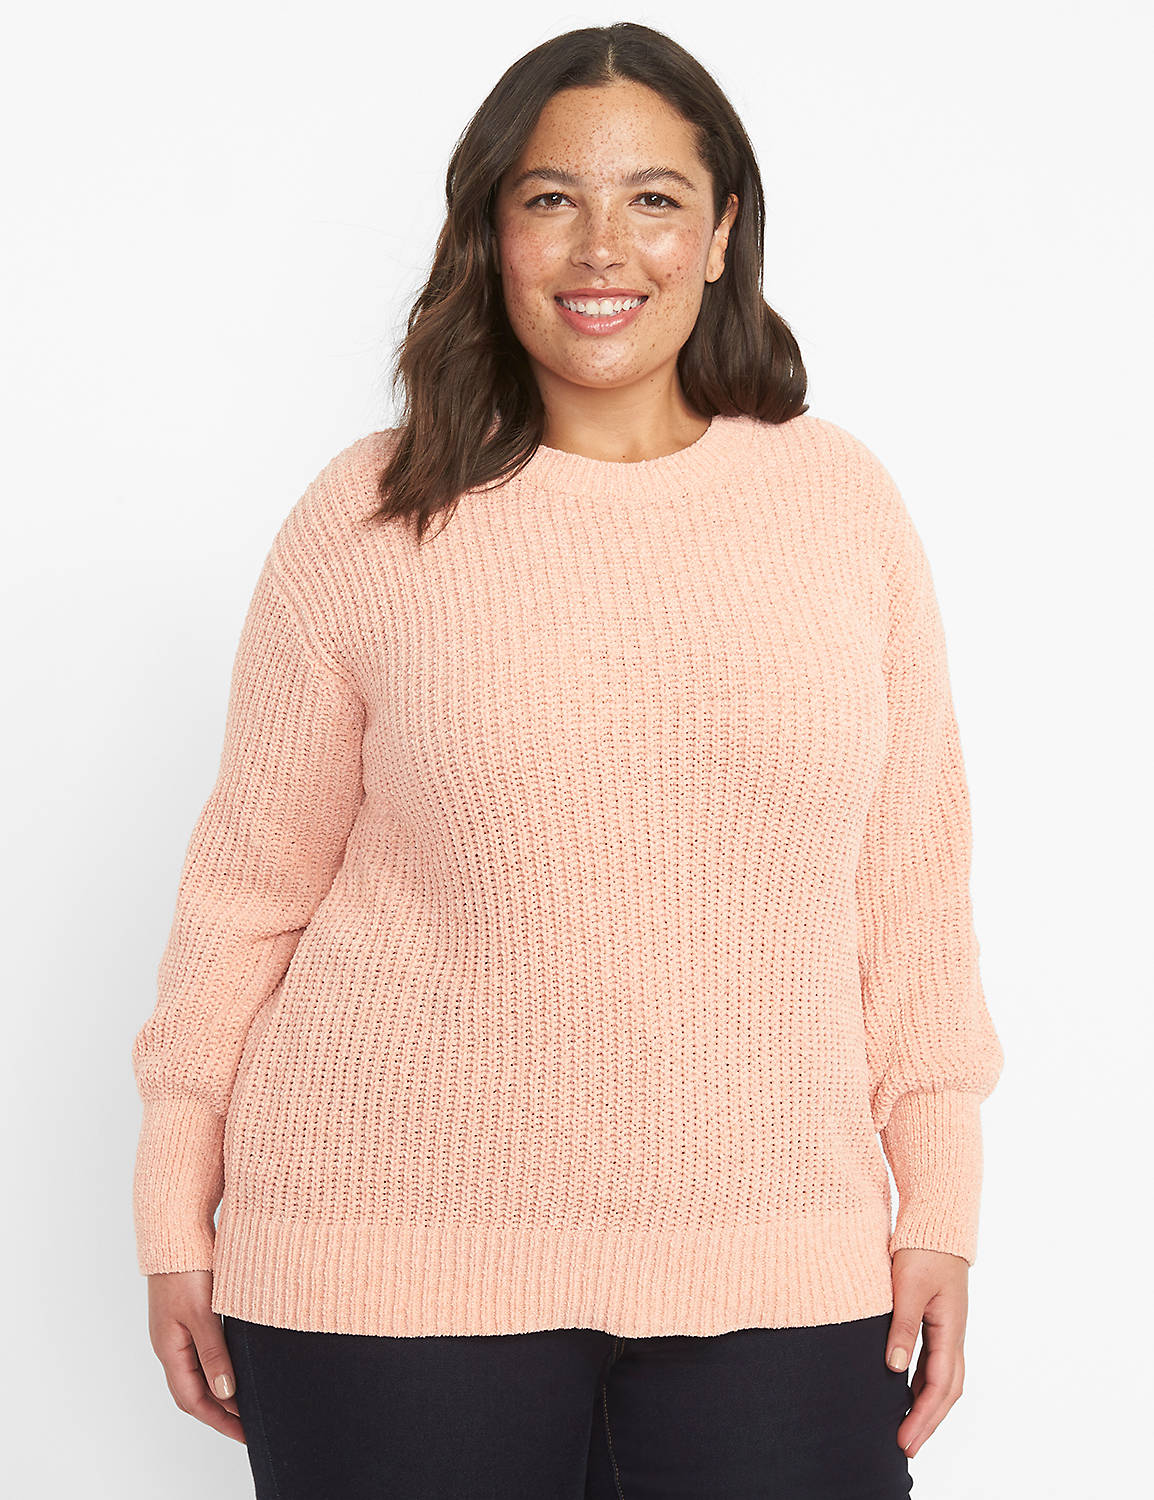 Long Sleeve Crew Neck Pullover 1124685:PANTONE Coral Pink:26/28 Product Image 1